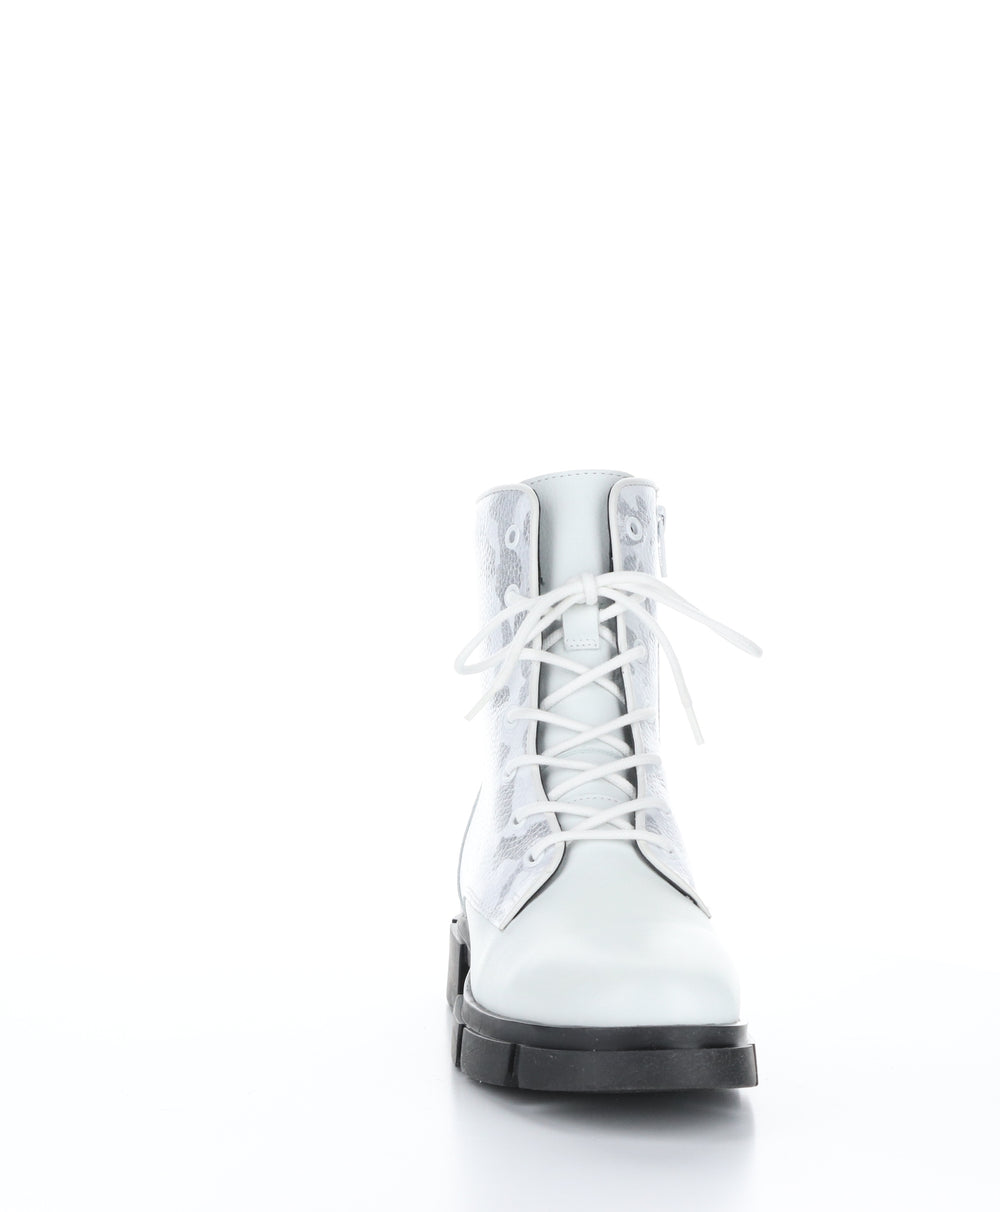 LUCK White/White/Silver Zip Up Boots|LUCK Bottes avec Fermeture Zippée in Blanc